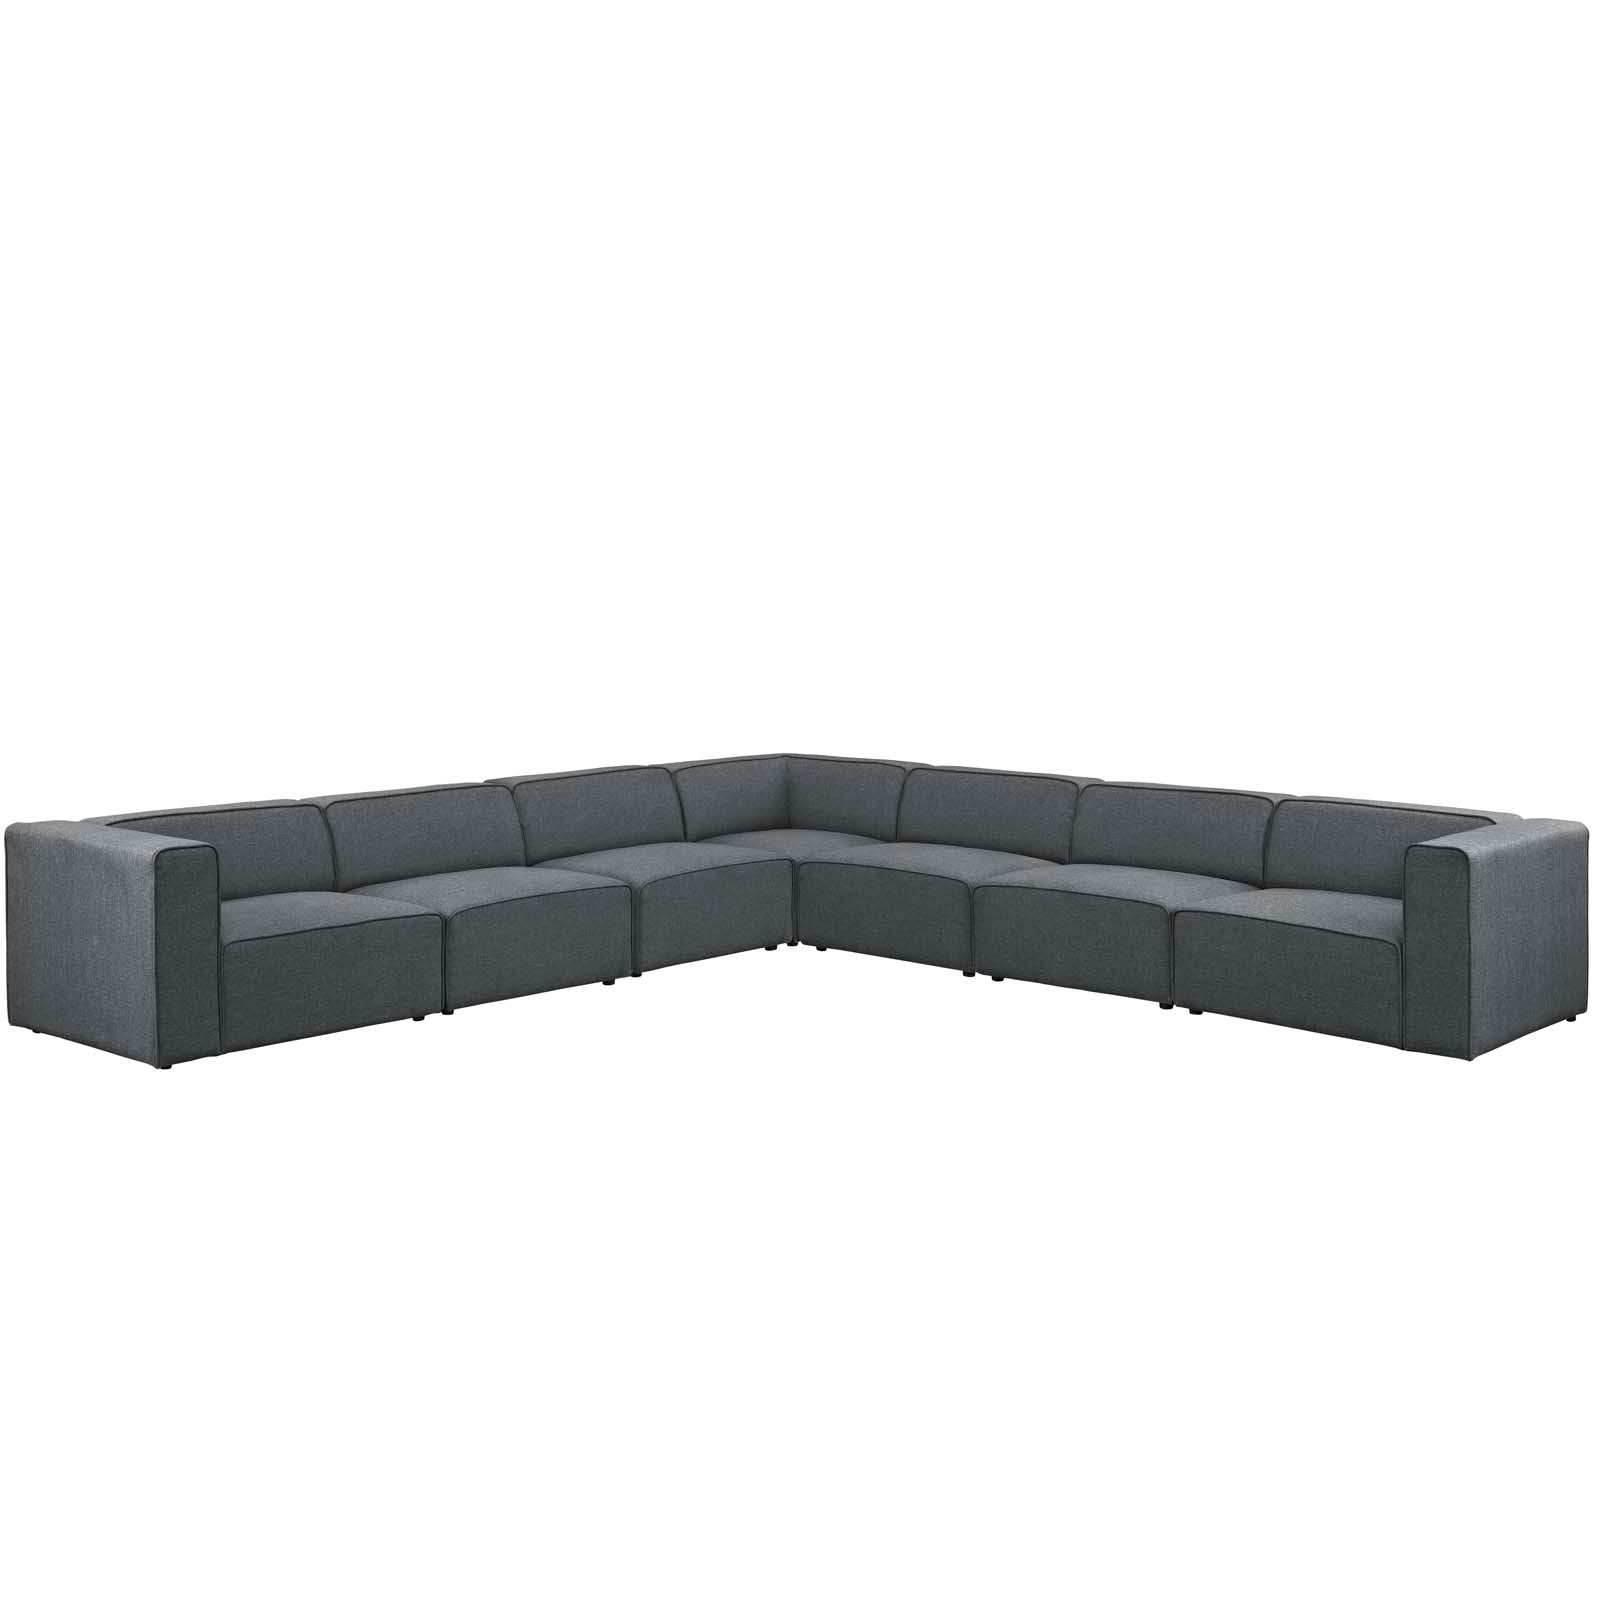 Modway Sectional Sofas - Mingle 7 Piece Upholstered Fabric Sectional Sofa Set Gray